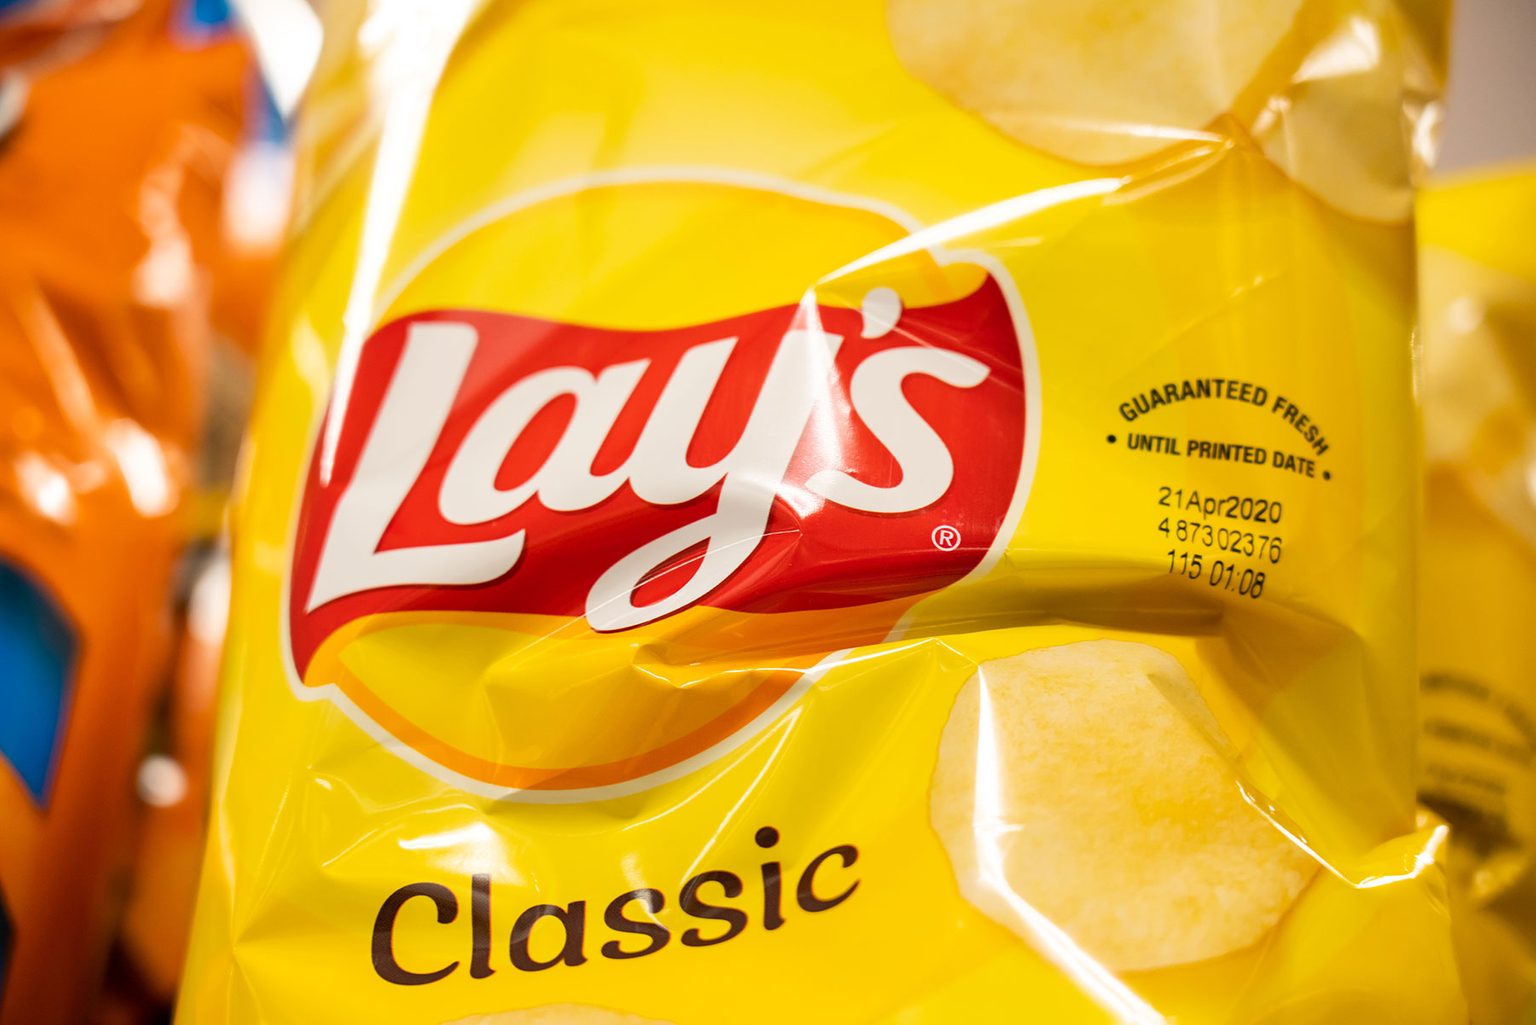 A FritoLay Chips Recall Affects Up to 4 States—Here's What We Know